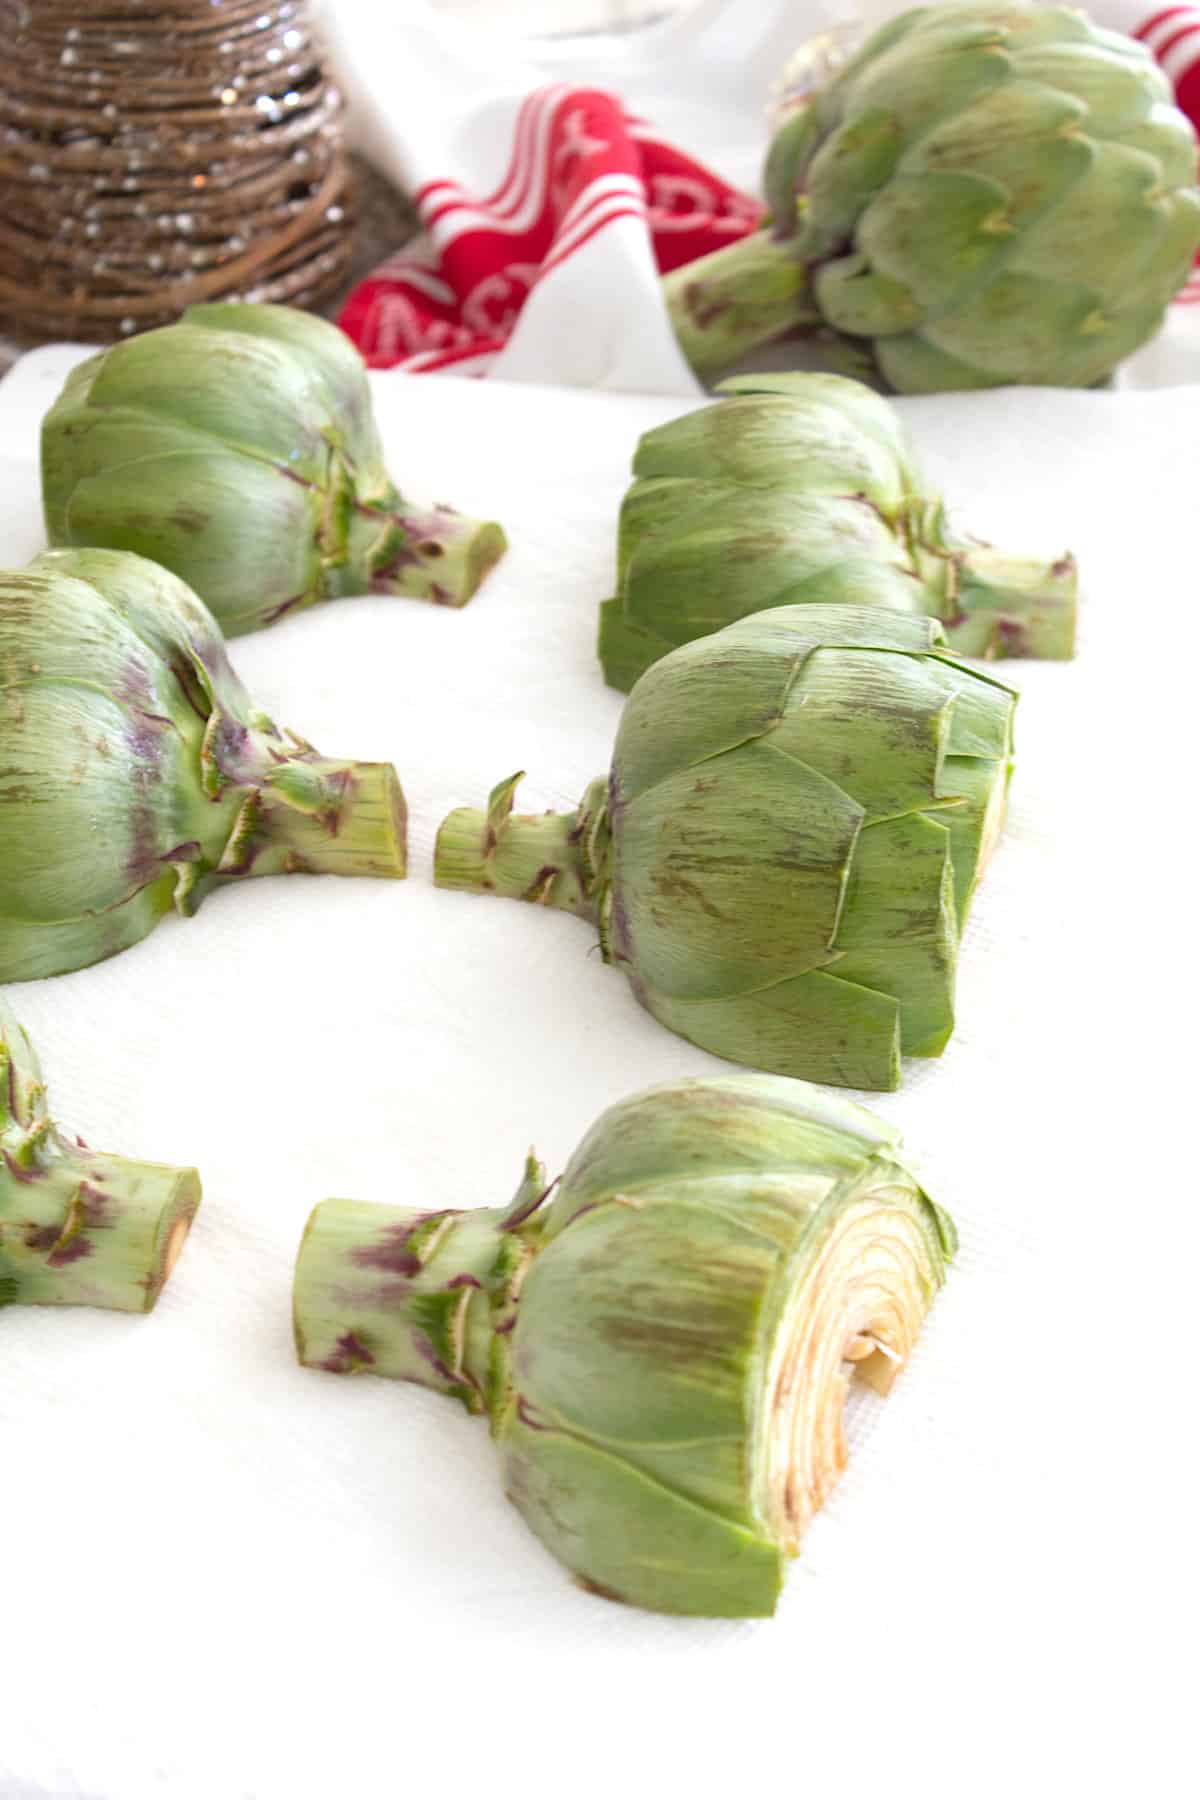 cleaned artichokes drying on paper towel